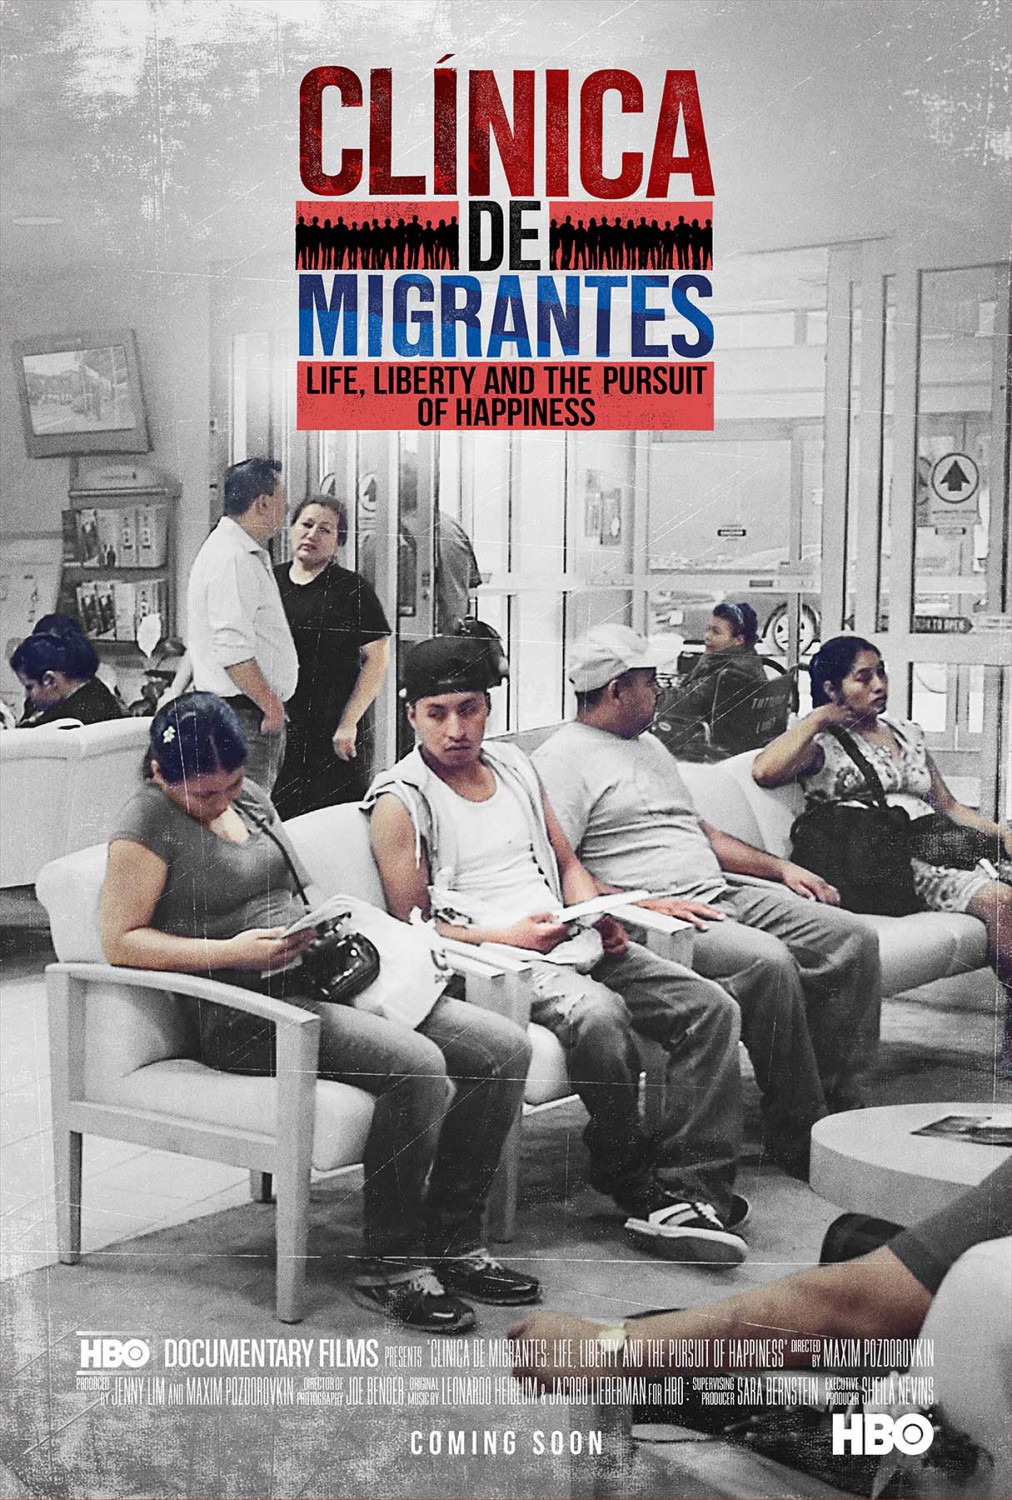 Extra Large Movie Poster Image for Clnica de Migrantes: Life, Liberty, and the Pursuit of Happiness